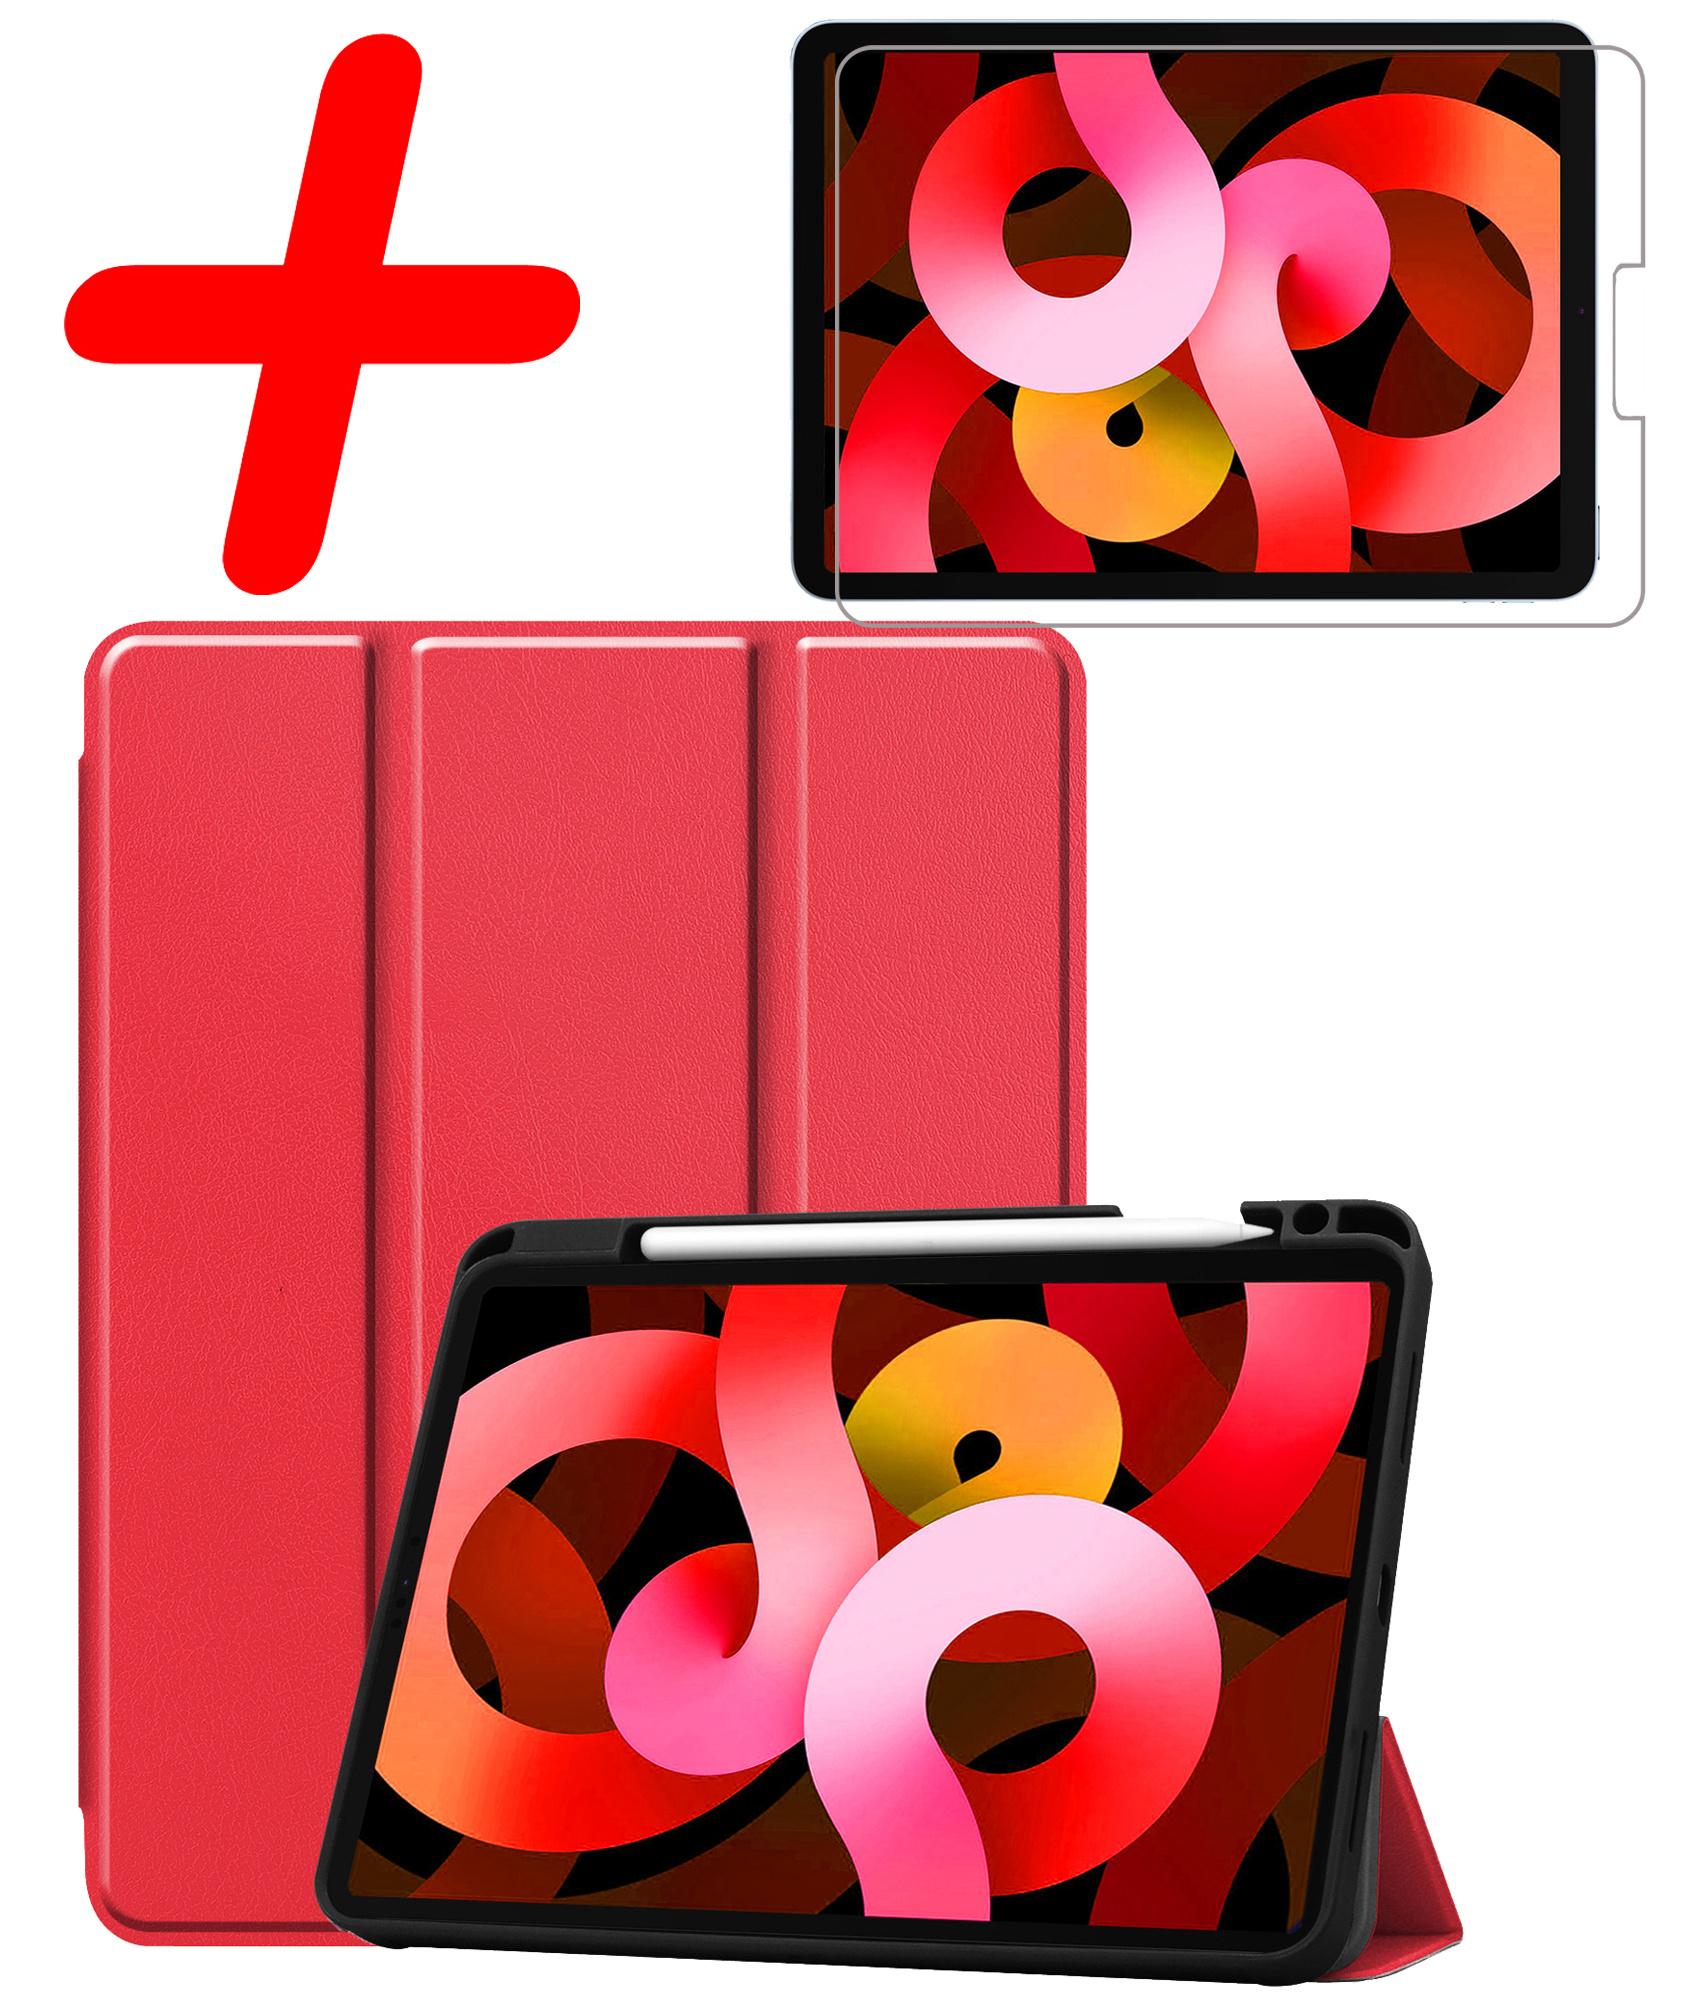 BASEY. iPad Air 5 2022 Hoes Met Screenprotector Rood - iPad Air 5 2022 Hoesje Uitsparing Apple Pencil Hard Cover Rood - iPad Air 5 2022 Bookcase Hoes Rood